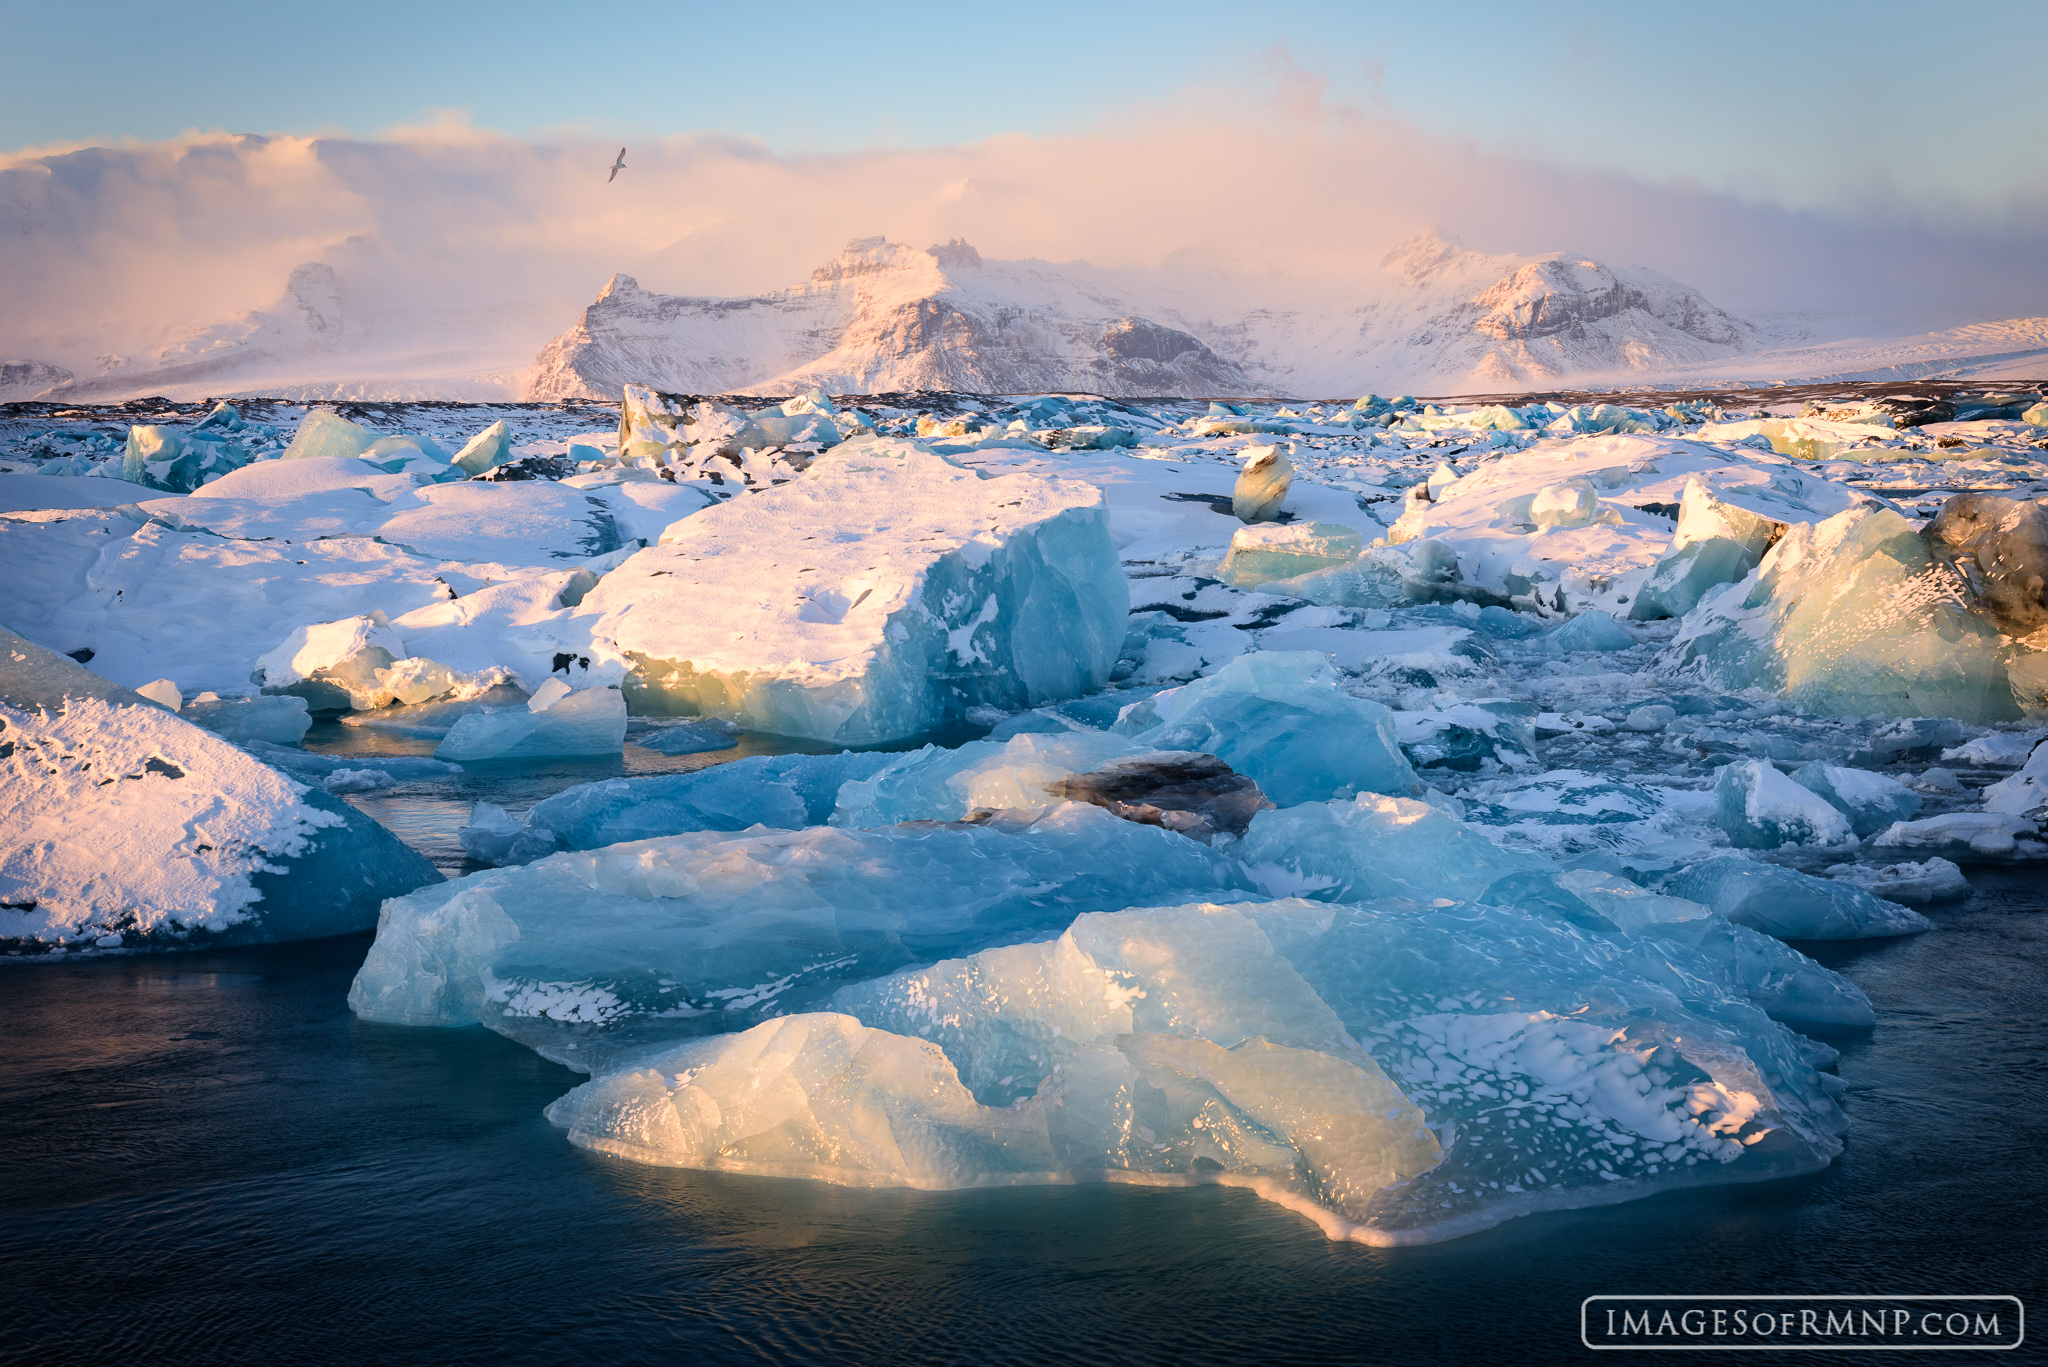 In December this glacial lagoon fills with ice that has broken off from the nearby glacier. It creates an icy view that few of...